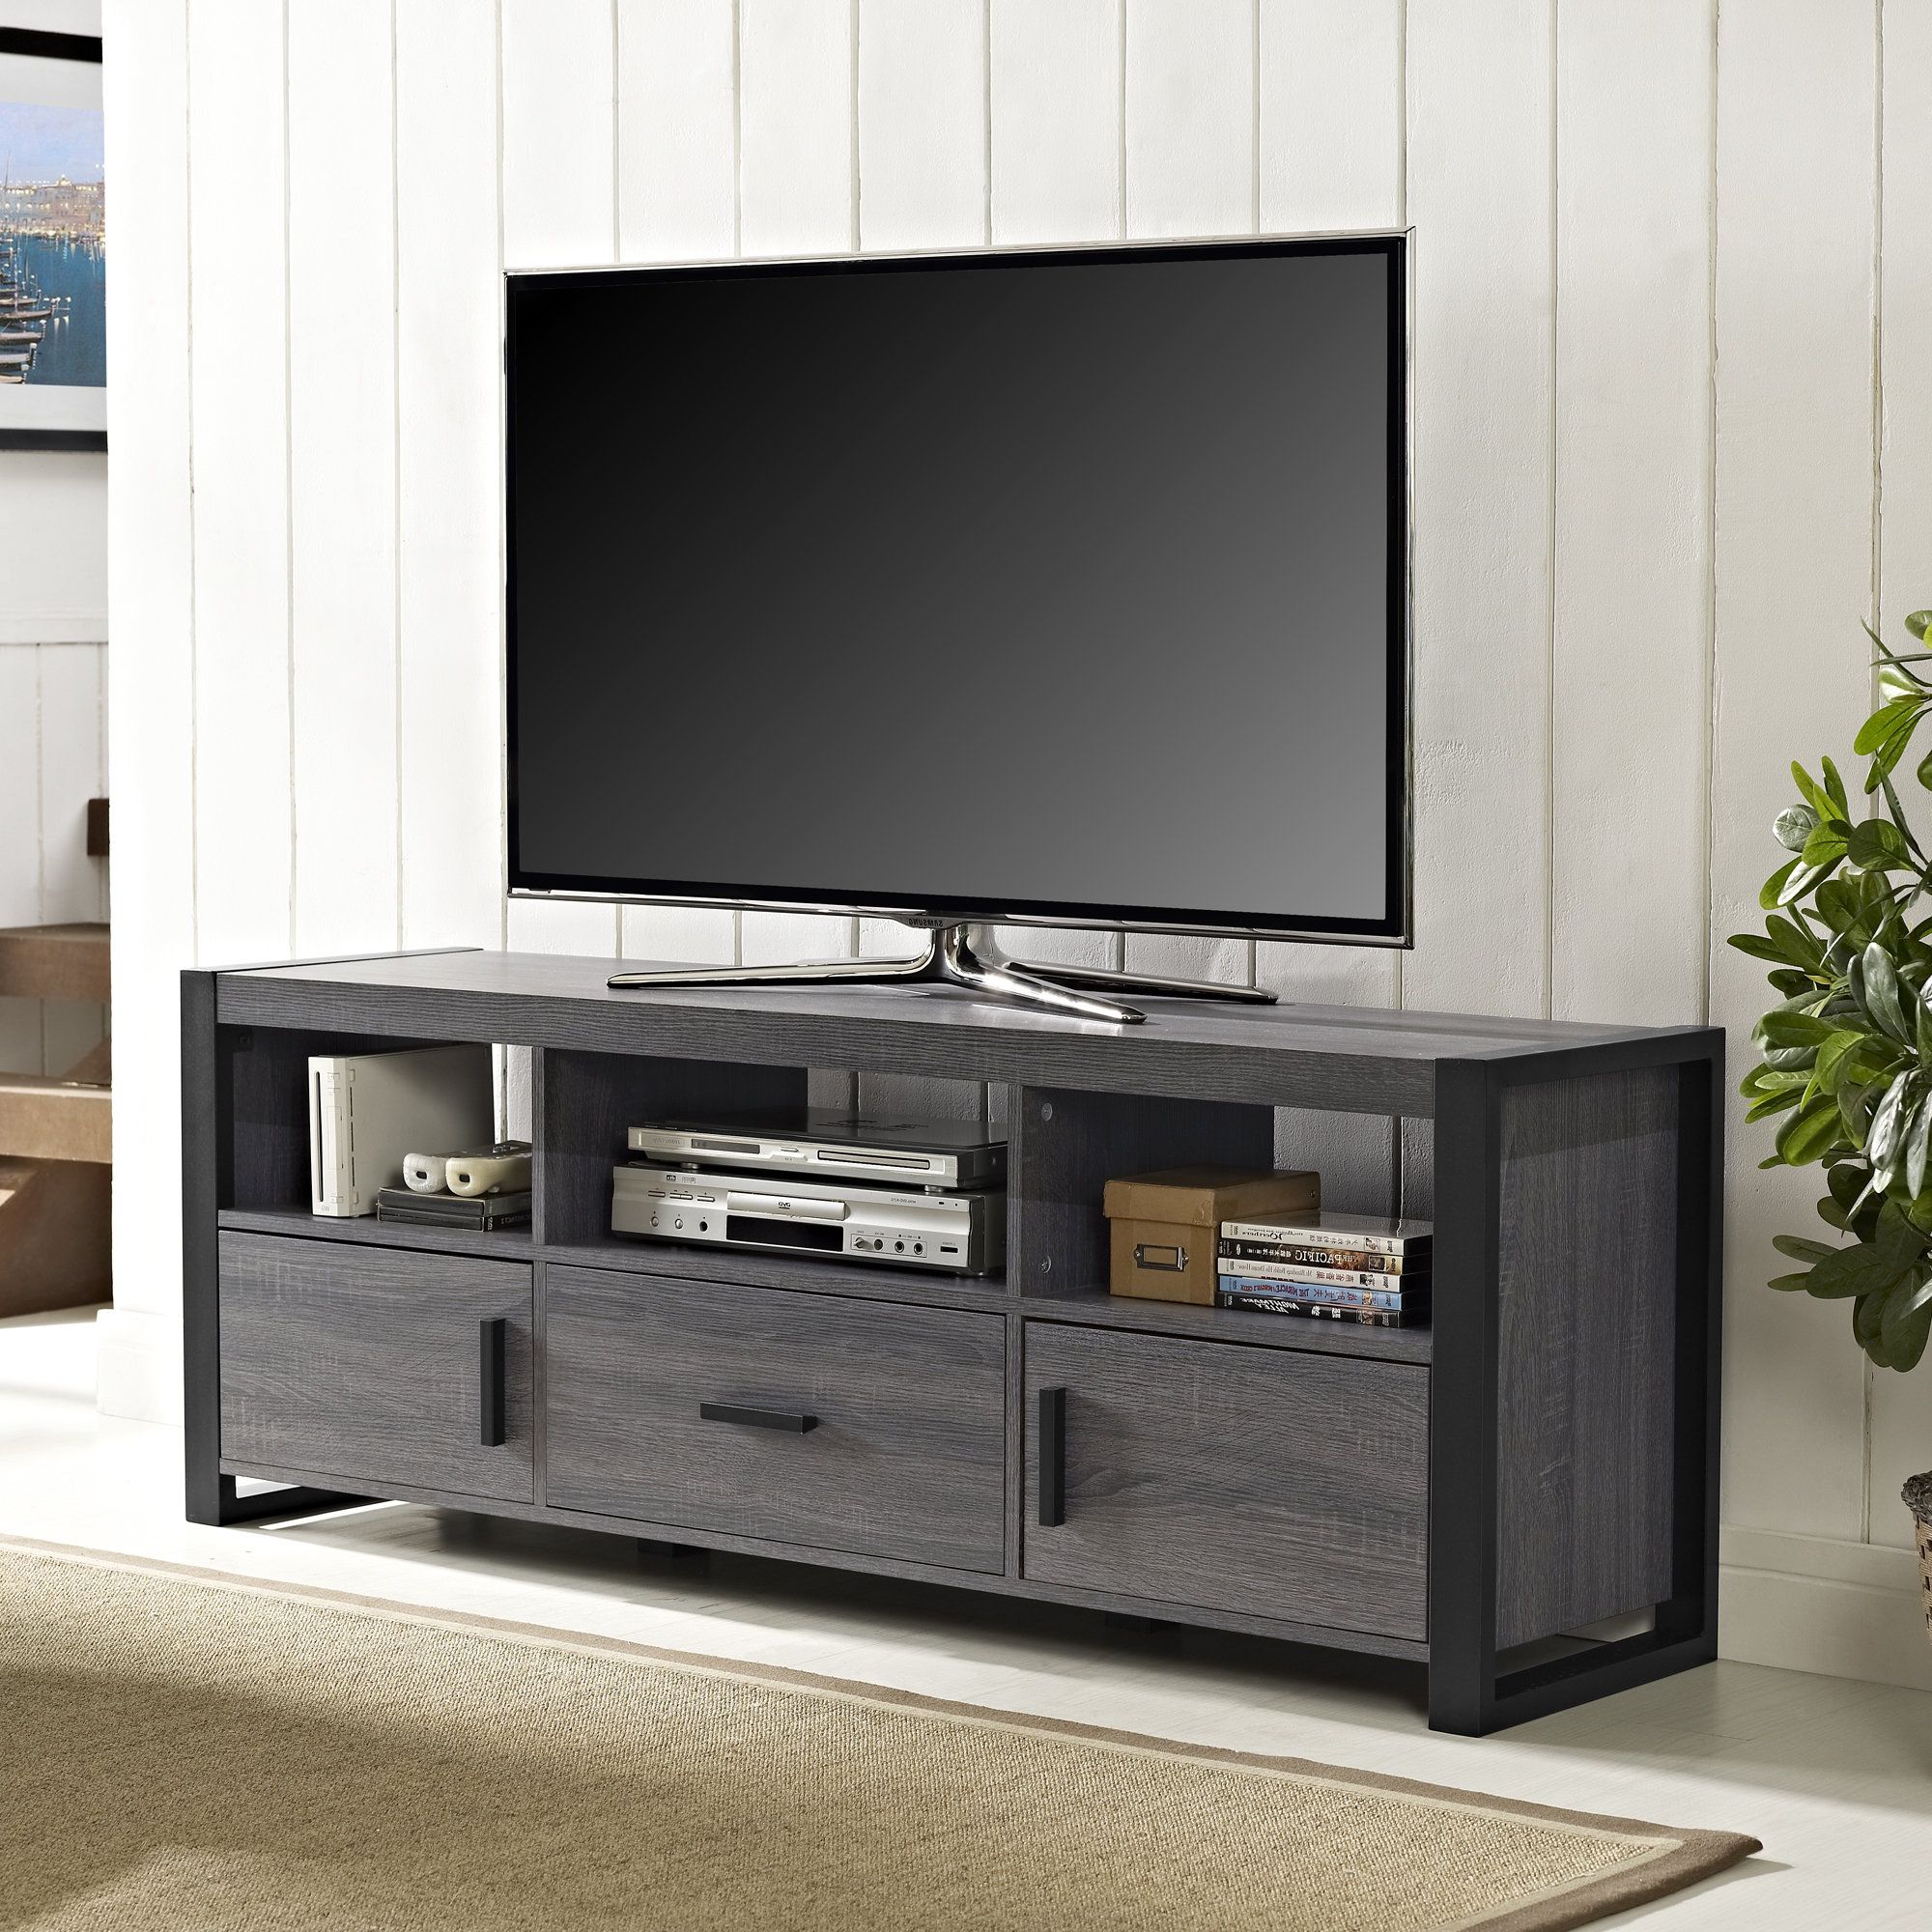 Widely Used Angelo:home Tv Stand For Tvs Up To 65" & Reviews (View 1 of 20)